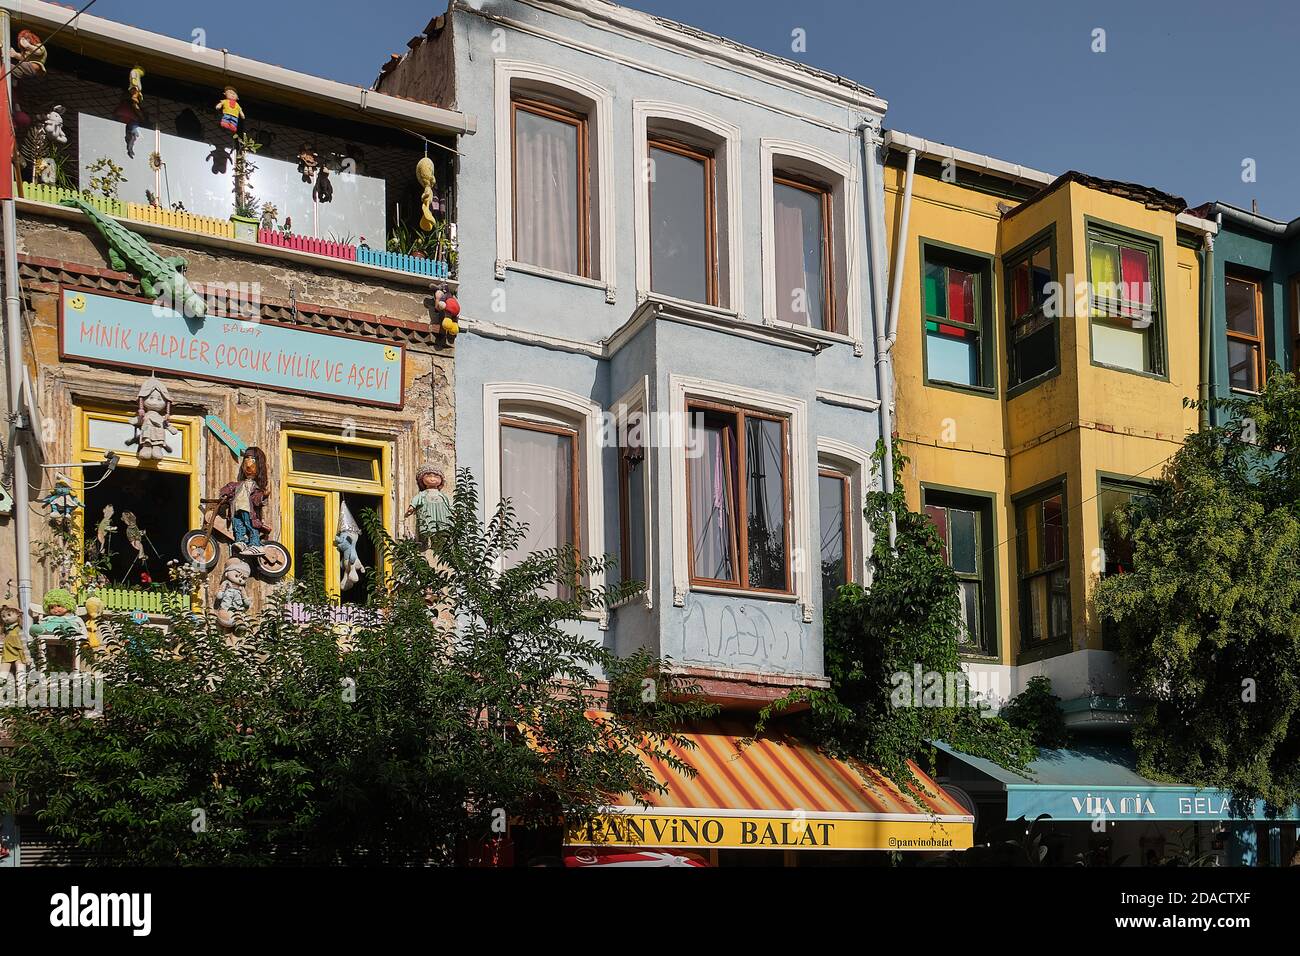 View of a back of a social welfare centre in Balat with toy puppets fixed to the outside walls, Istanbul, Turkey Stock Photo